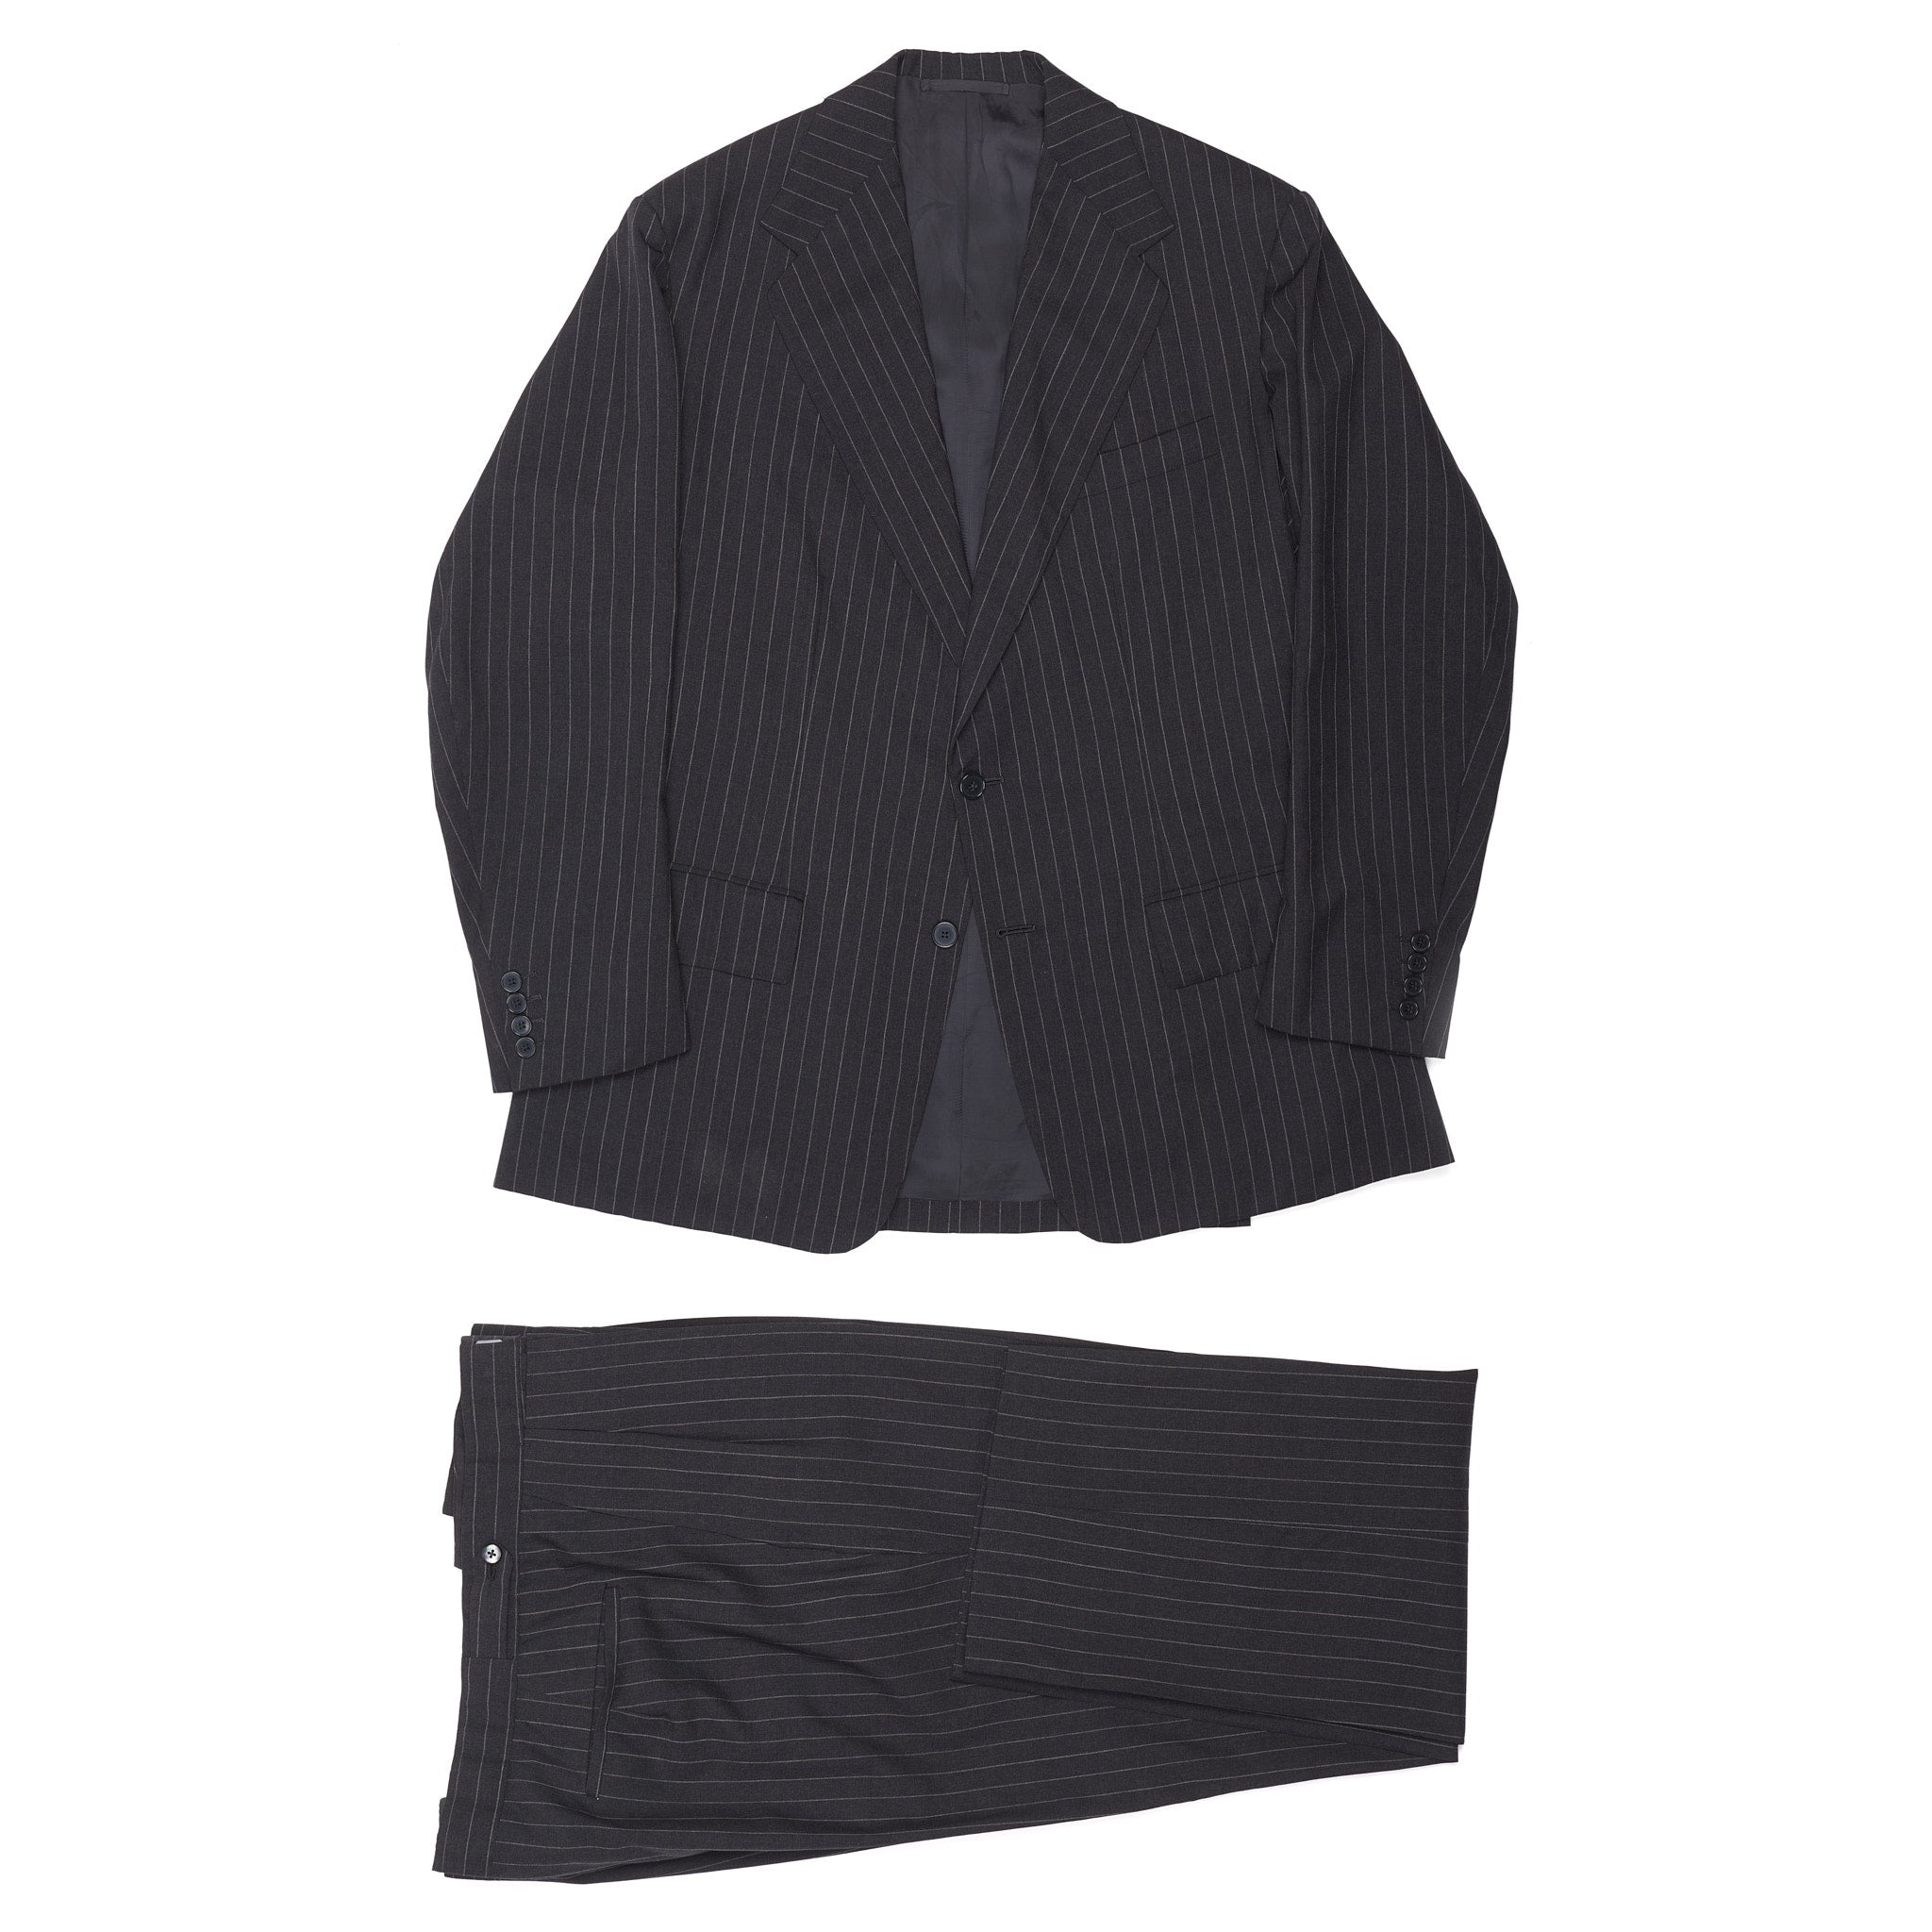 ANDERSON & SHEPPARD Savile Row Bespoke Gray Striped Wool-Mohair Suit US 44 ANDERSON & SHEPPARD